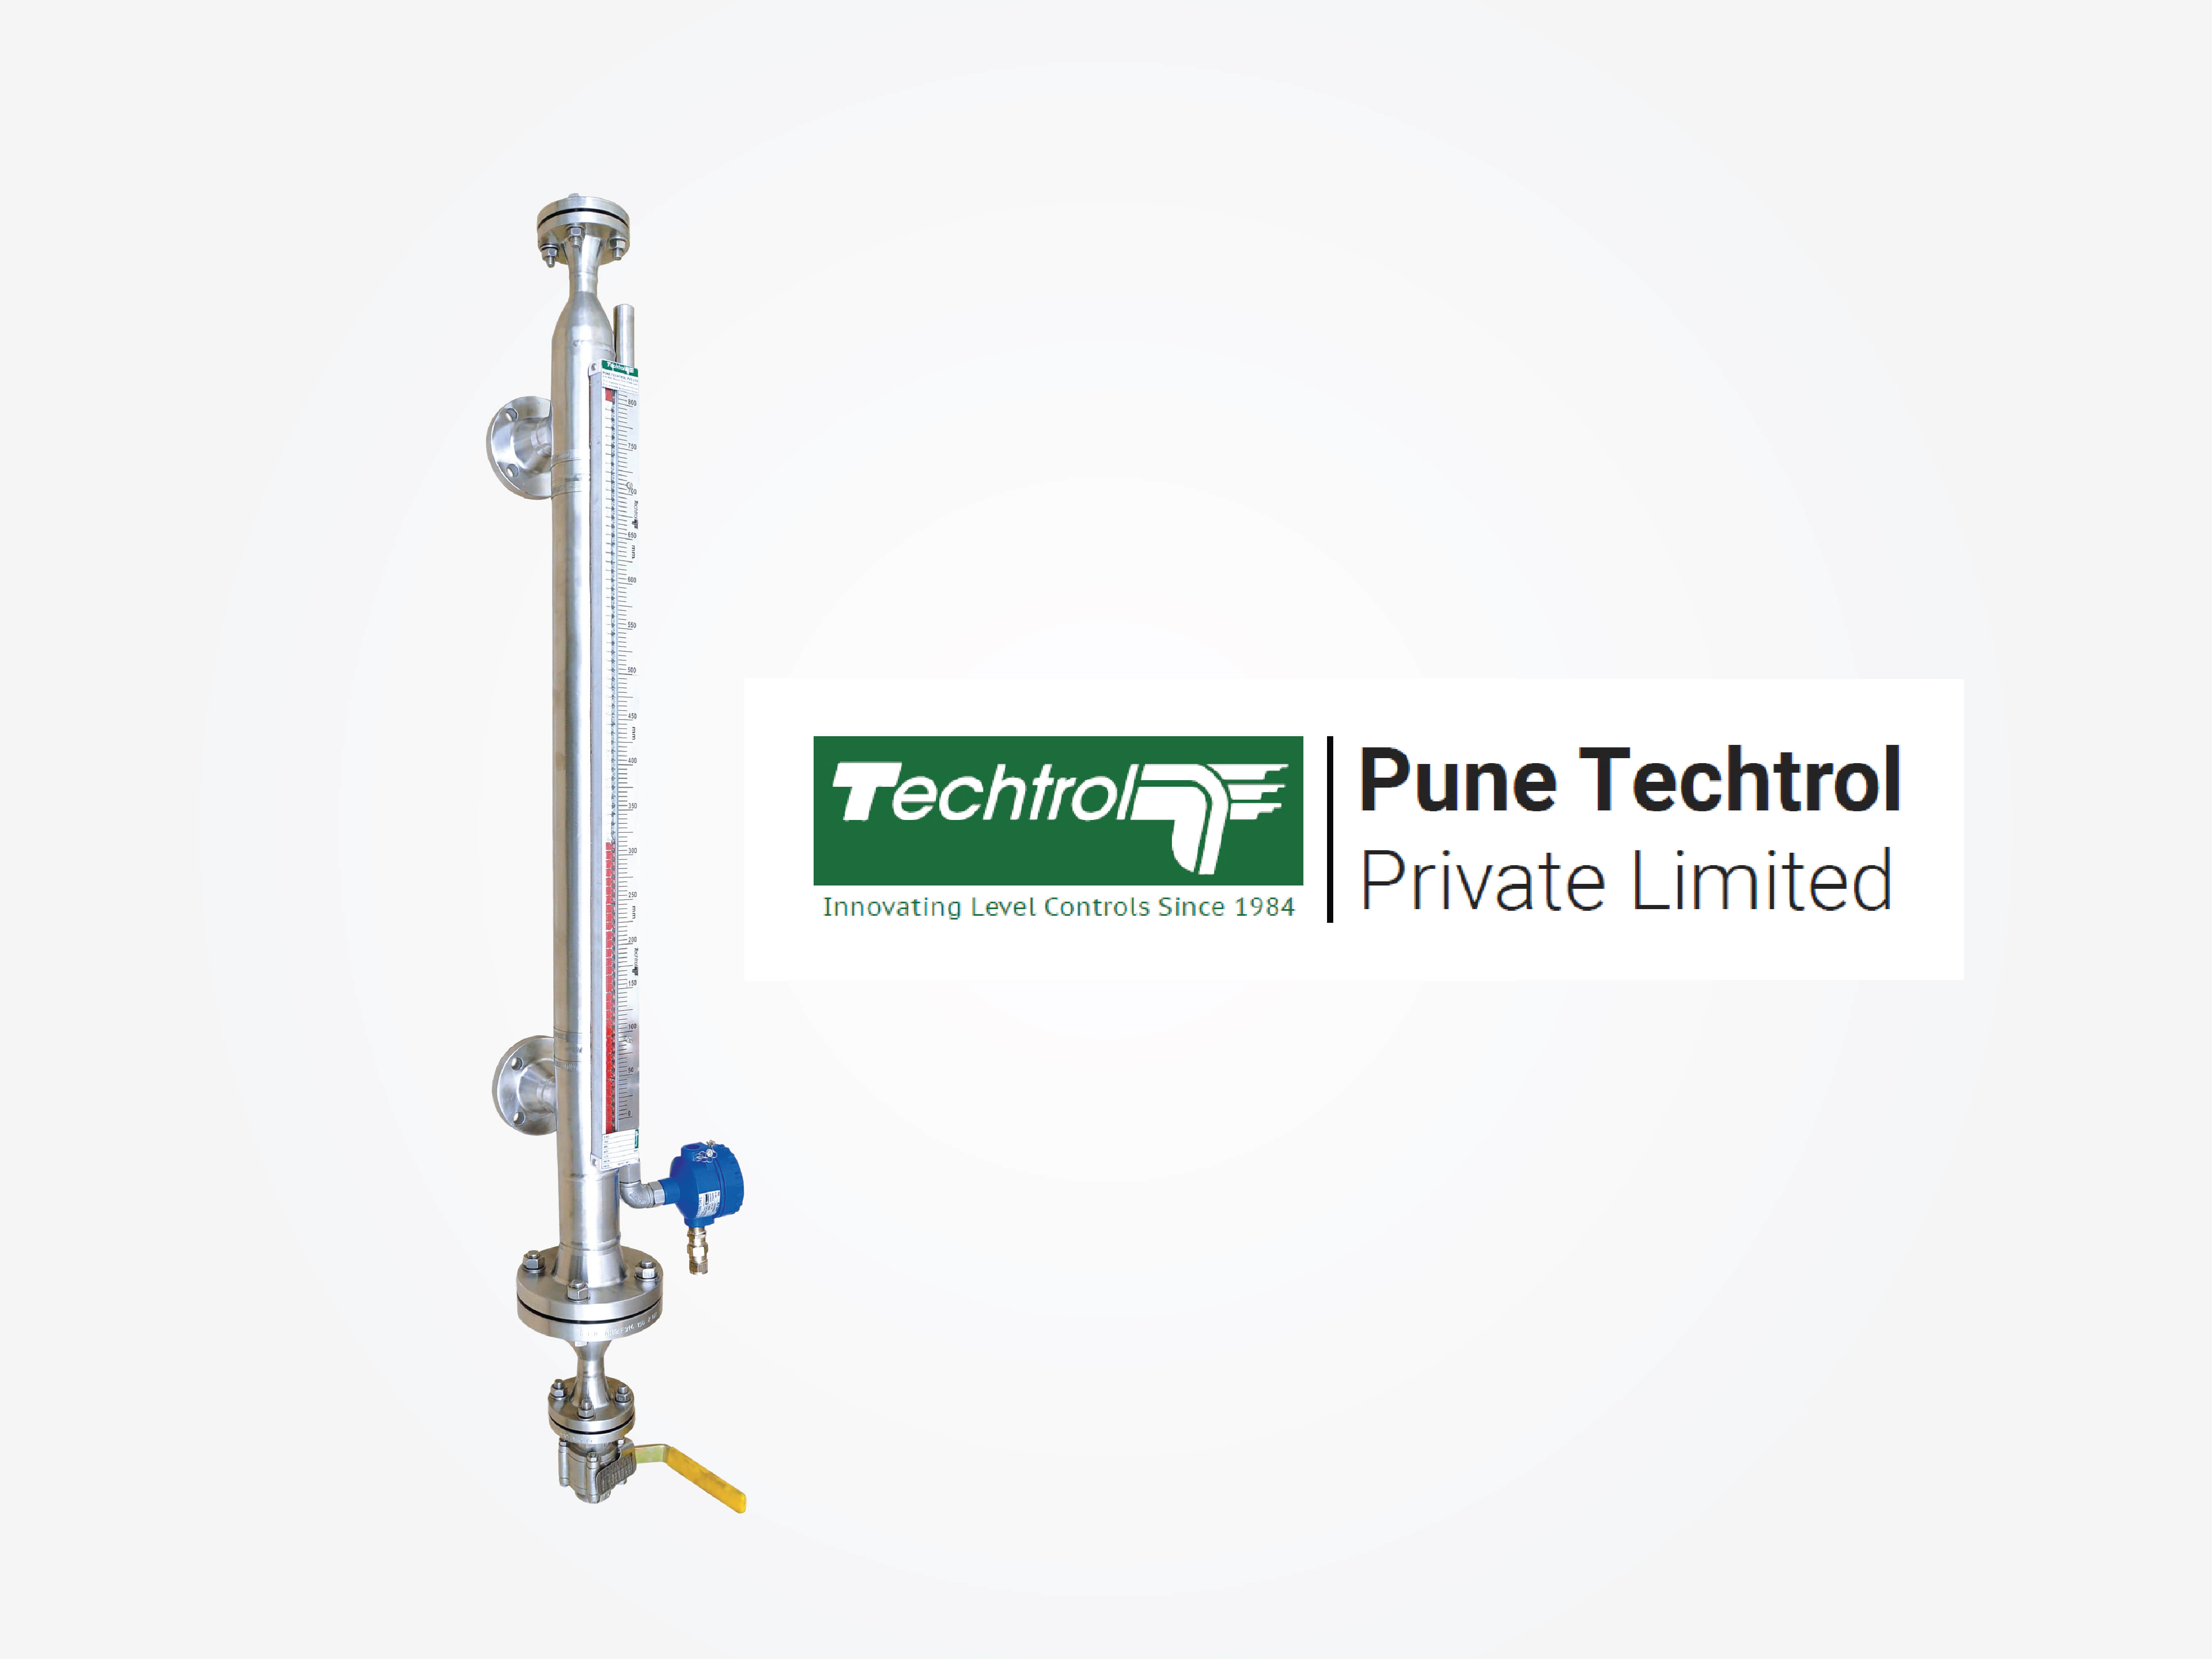 Pune Techtrol Receives Certificate from Shree Satyanarayan Industrial Suppliers for Magnetic Level Gauges